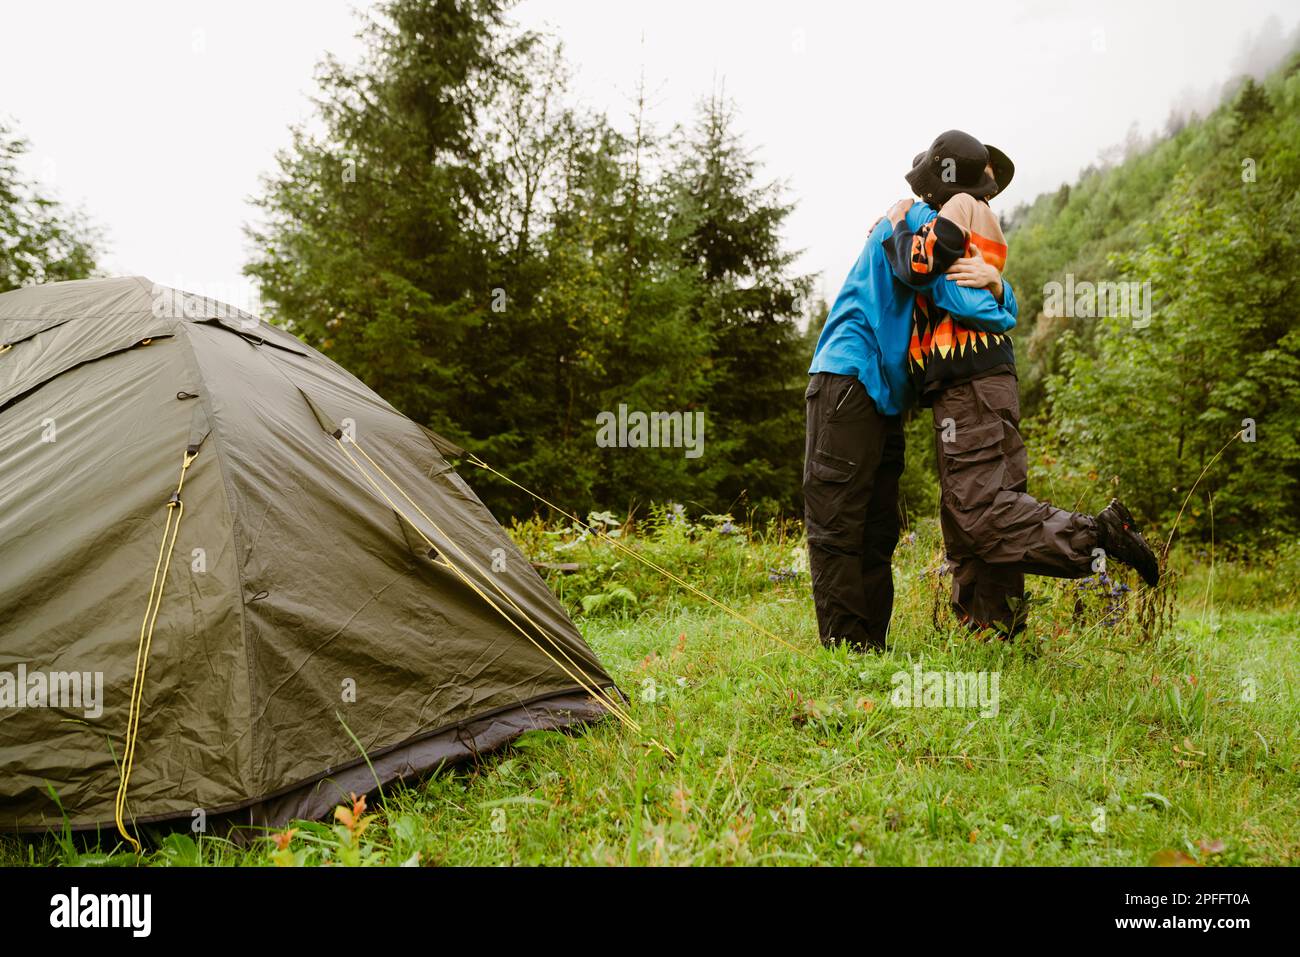 Young couple of travellers wearing panama hats hugging while standing near camping tent in green forest Stock Photo